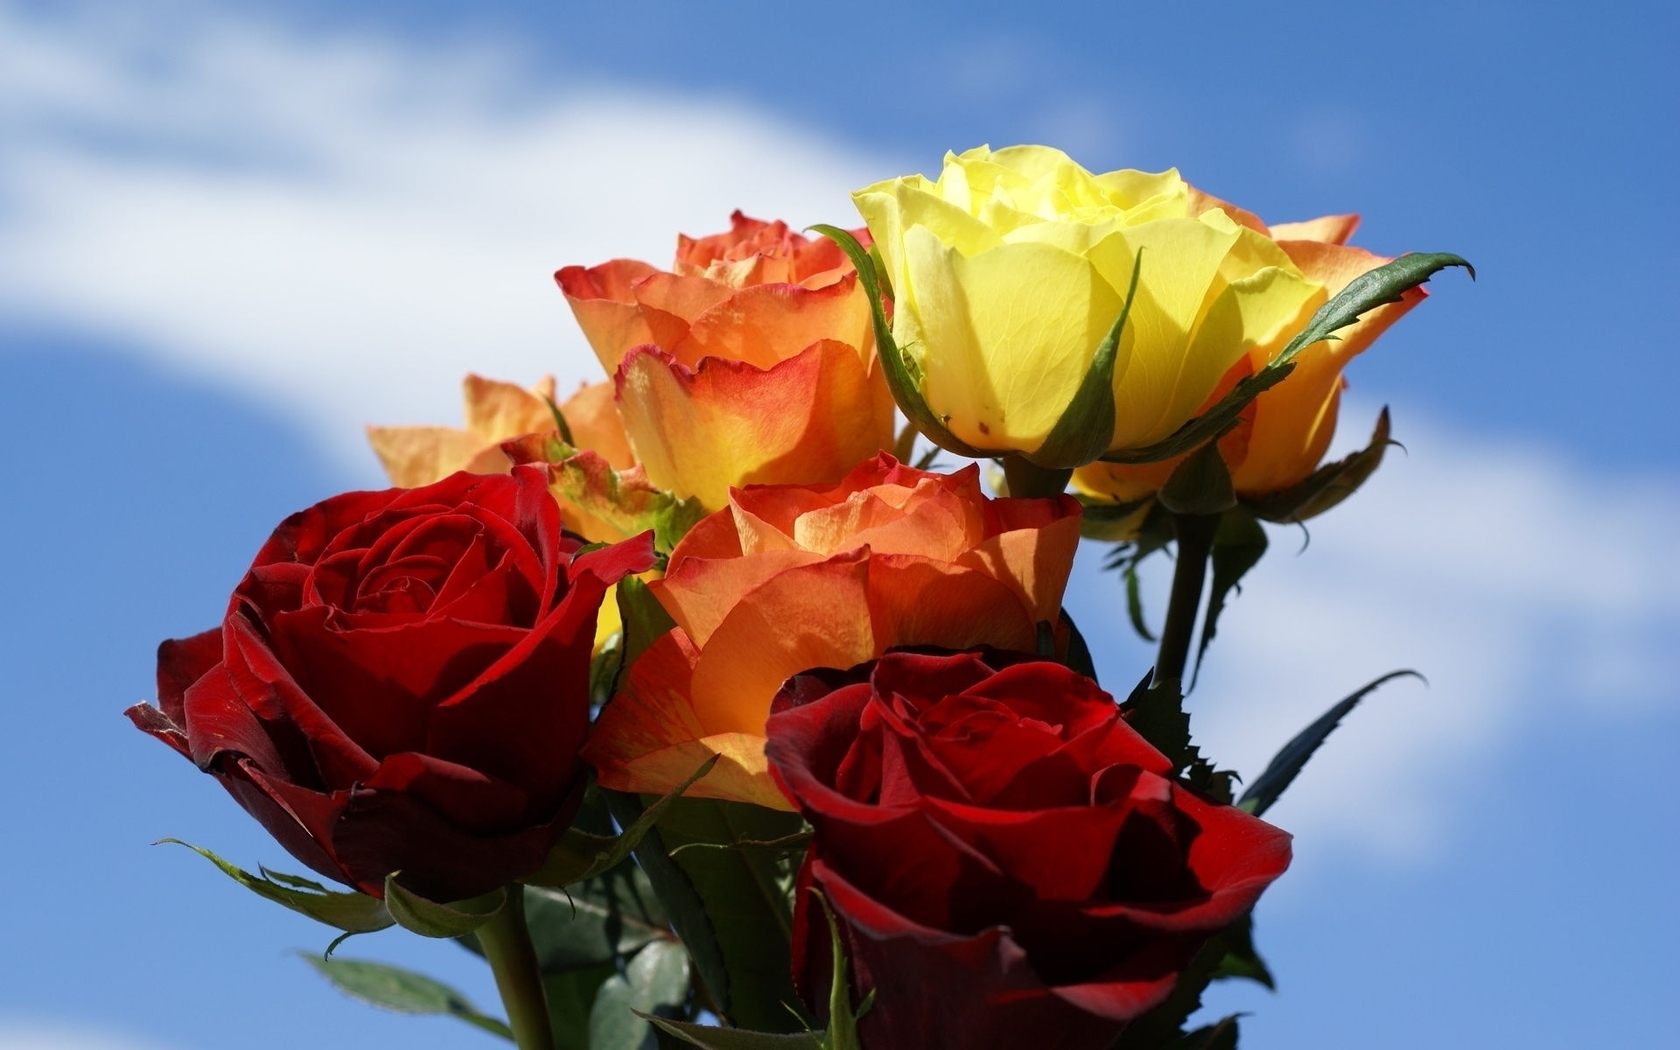 Image: Flowers, roses, sky, clouds, different colors